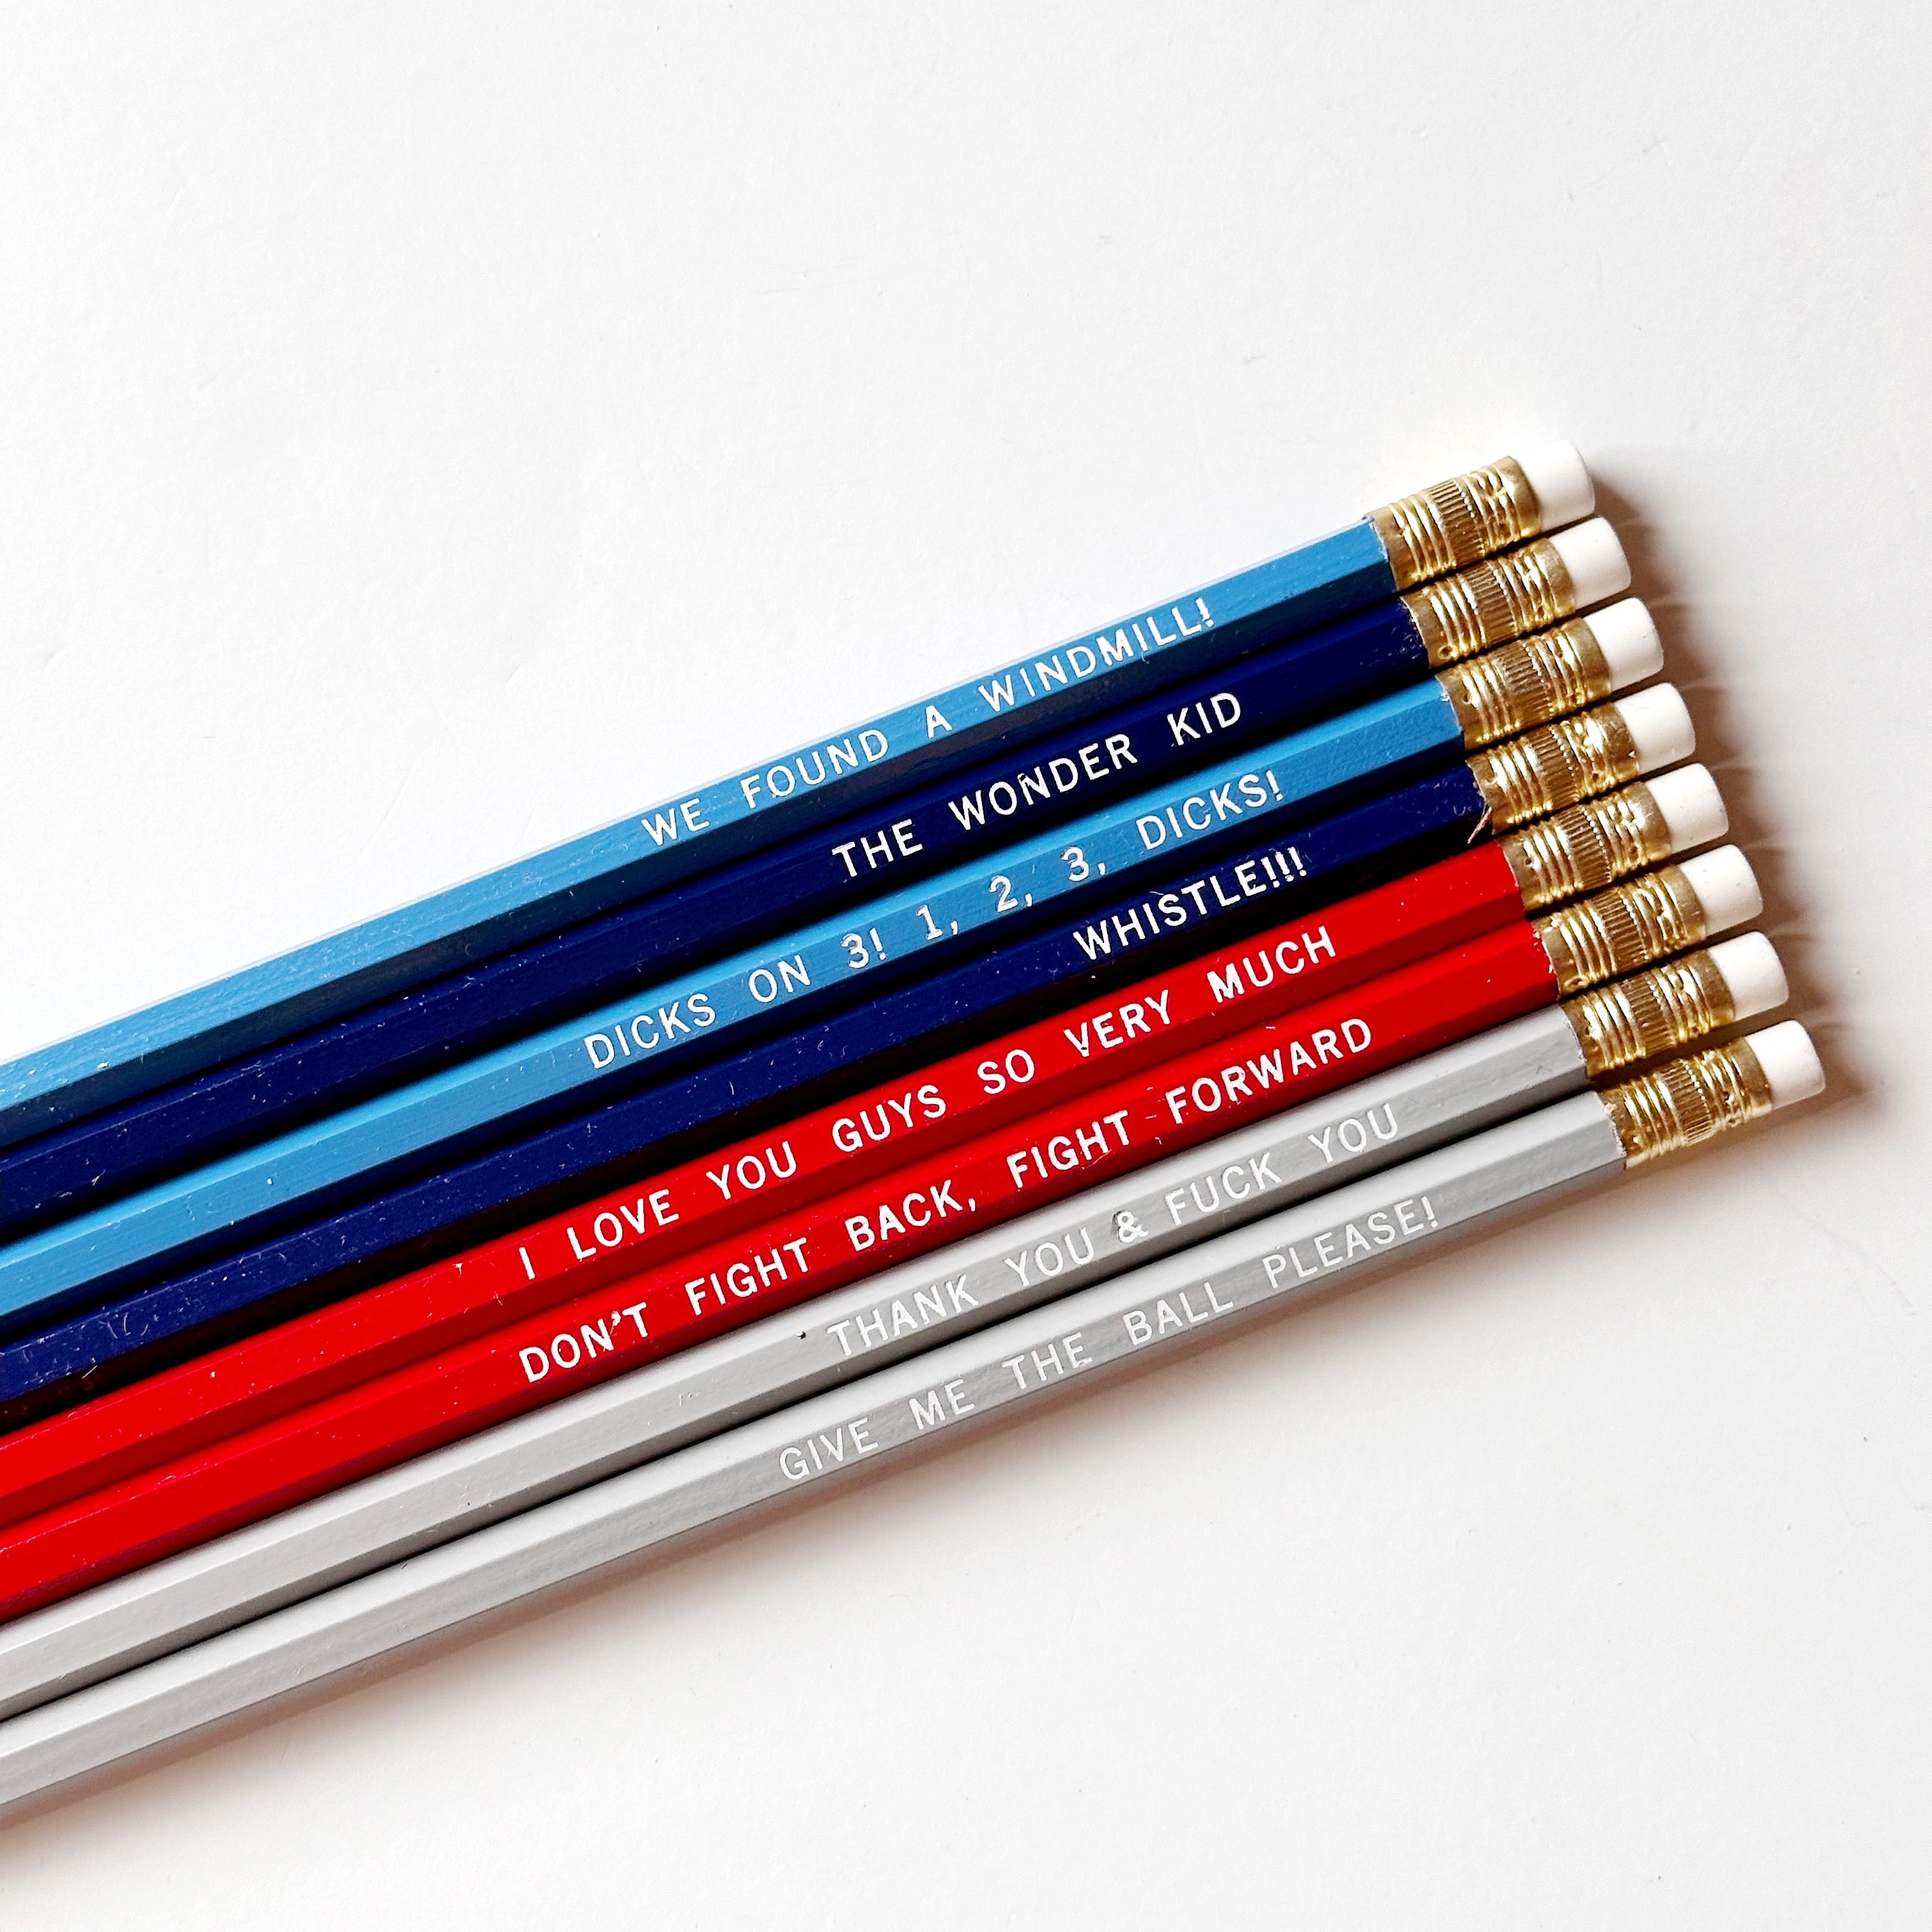 Image of pencil set in blue, red white, white text says, "We Found A Windmill! ","The Wonder Kid ","Dicks on 3! 1, 2, 3, Dicks! ","Whistle!! ","I Love You Guys So Very Much ","Don't Fight Back, Fight Forward ","Thank You & Fuck You","Give Me The Ball Please!".